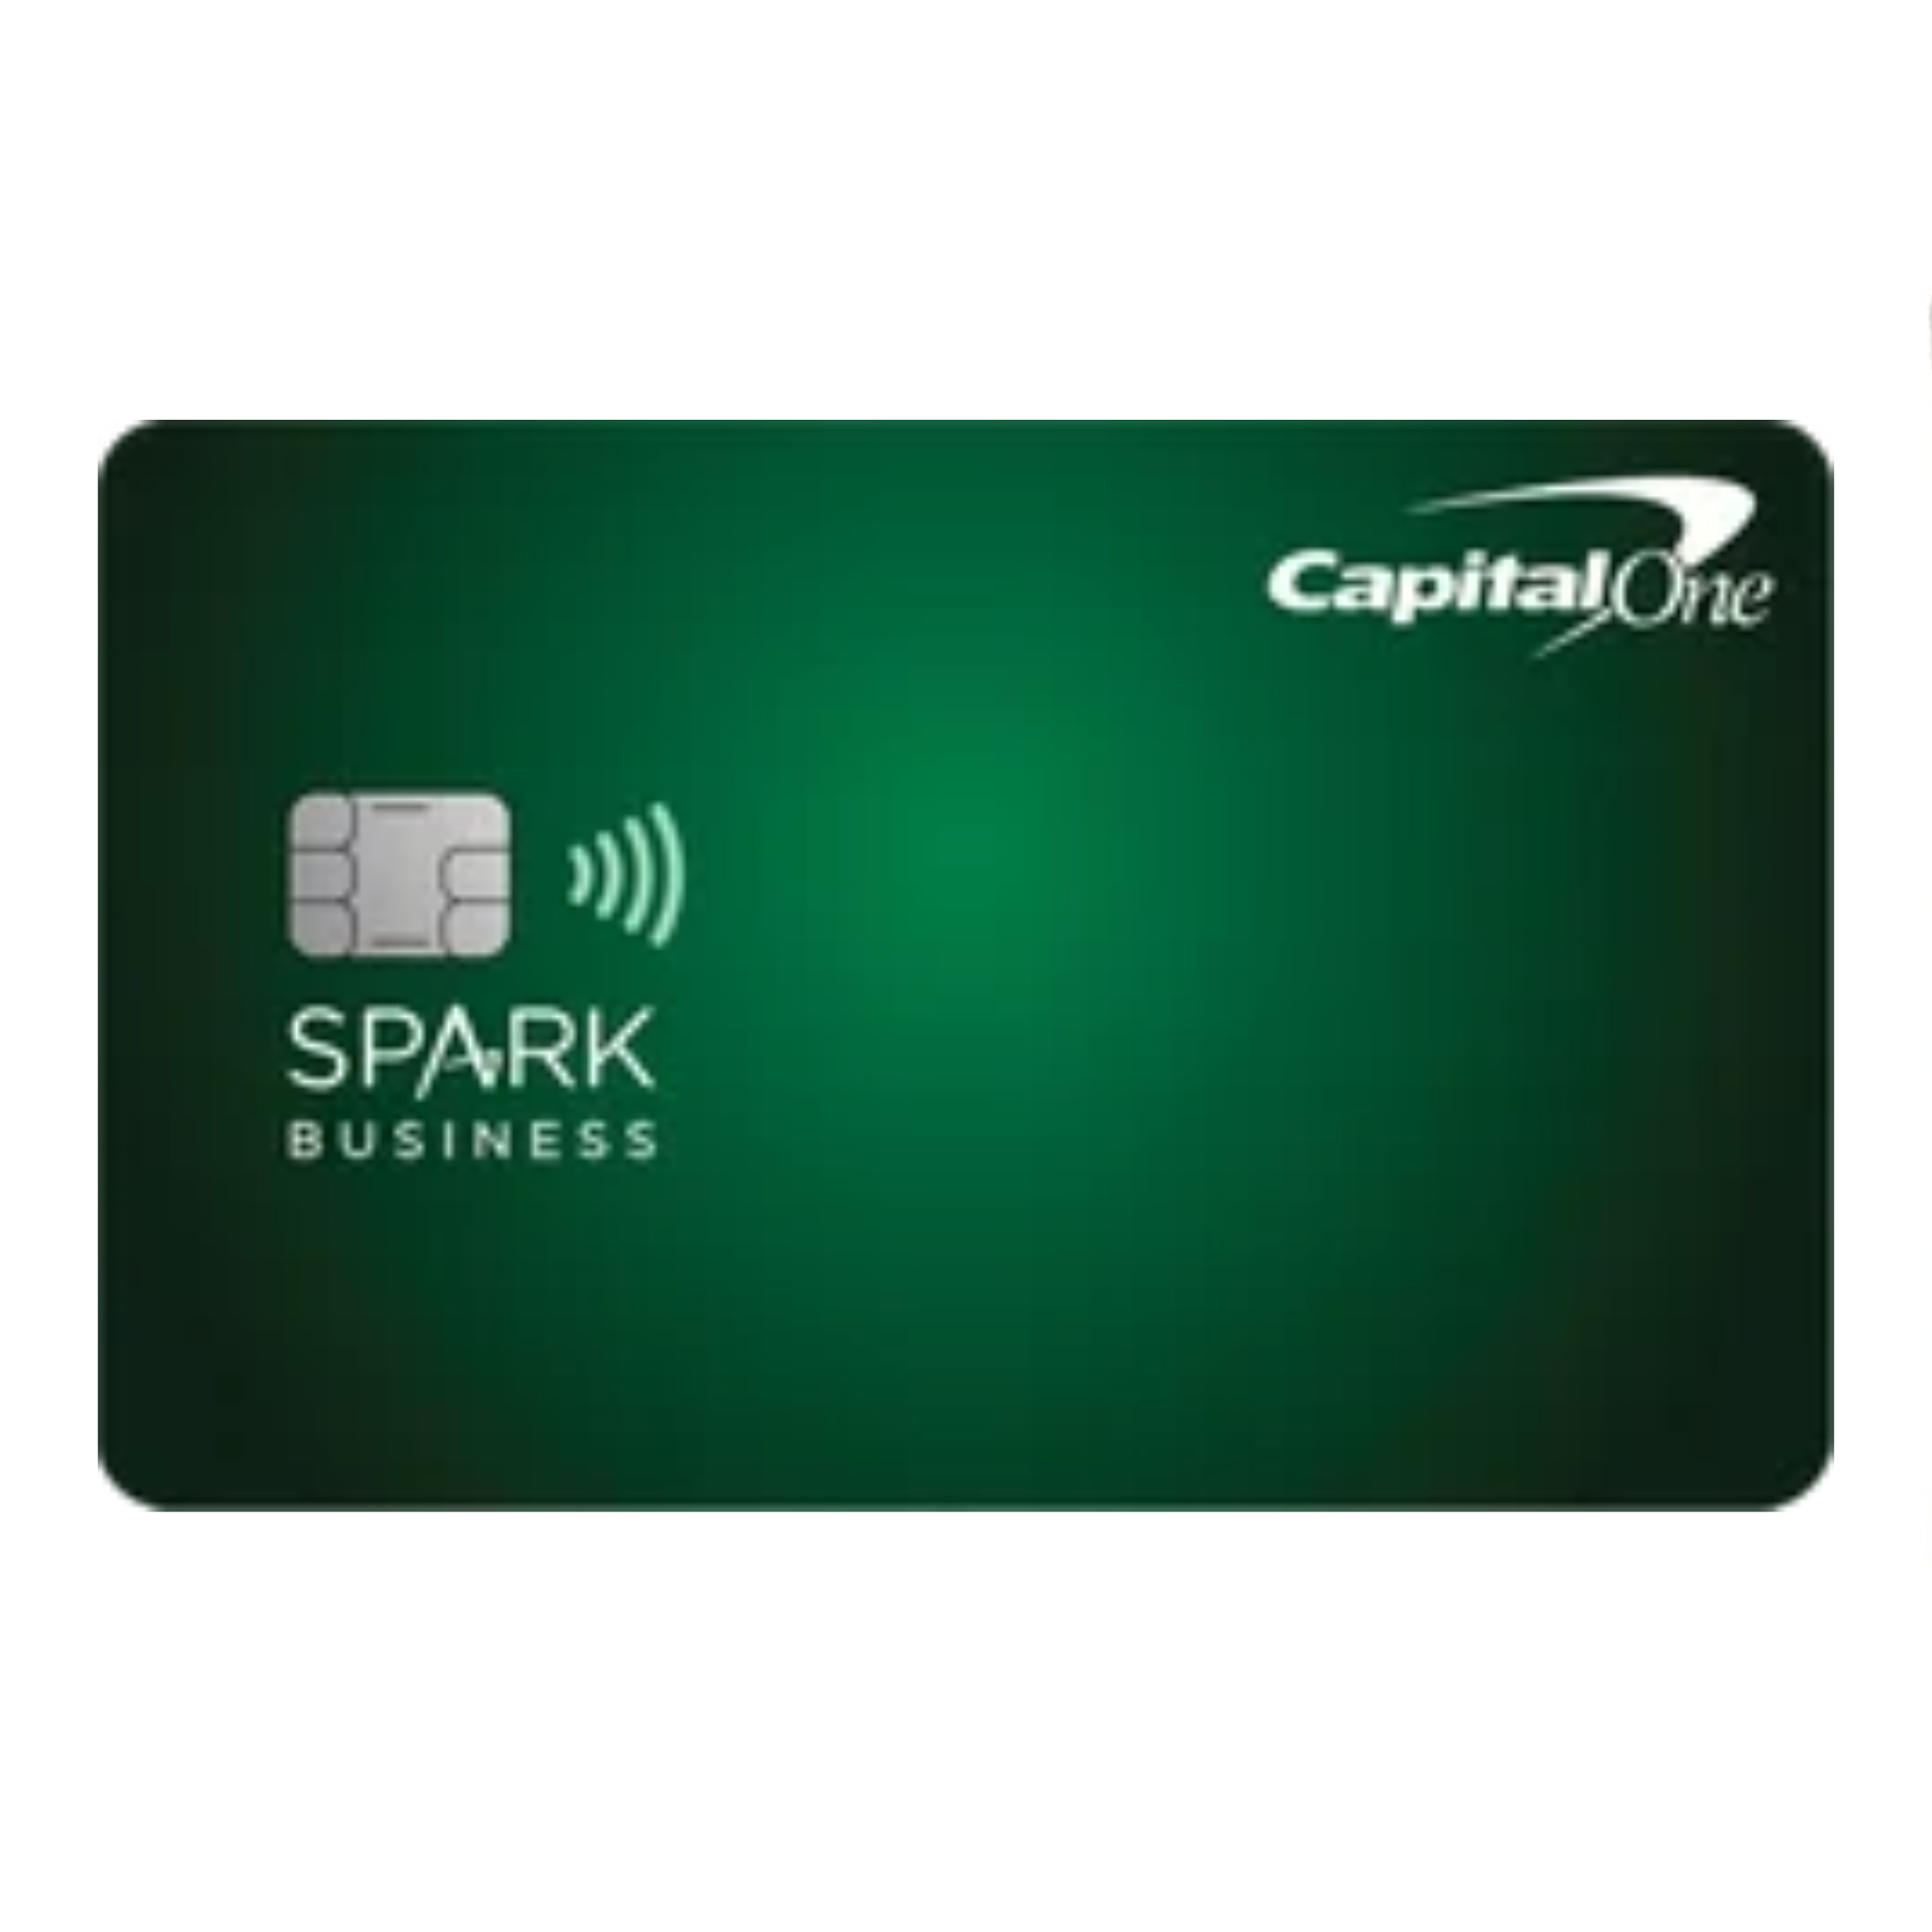 Capital One Spark Cash Plus - The Great Cashback Option for Businesses